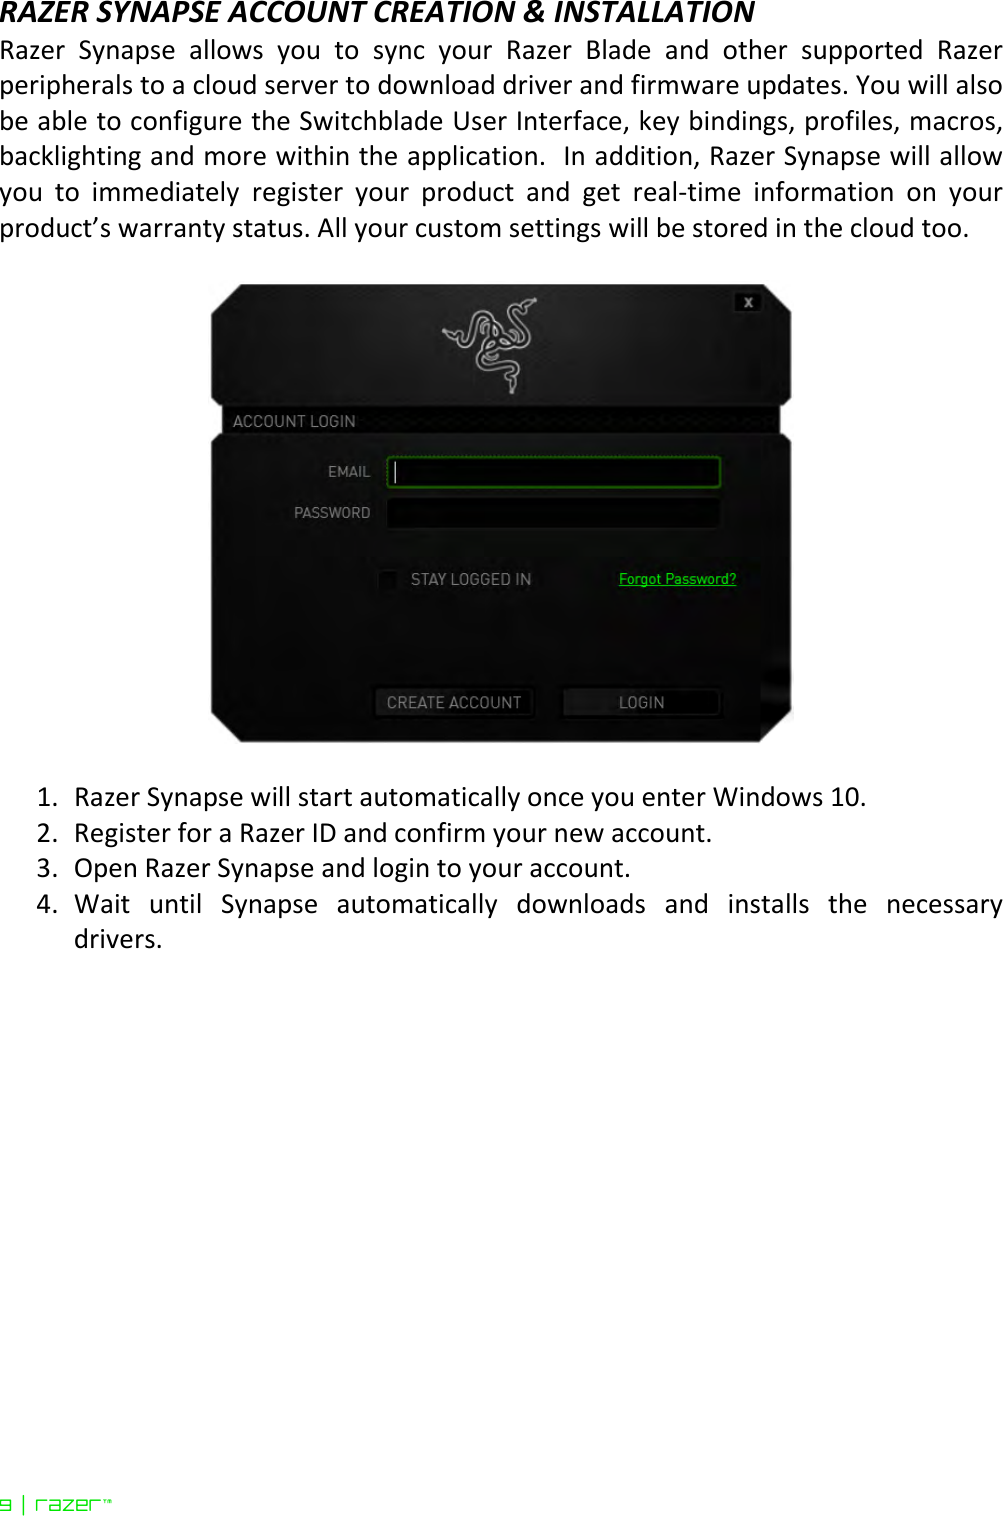 9 | razer™  RAZER SYNAPSE ACCOUNT CREATION &amp; INSTALLATION Razer  Synapse  allows  you  to  sync  your  Razer  Blade  and  other  supported  Razer peripherals to a cloud server to download driver and firmware updates. You will also be able to configure the Switchblade User Interface, key bindings, profiles, macros, backlighting and more within the application.  In addition, Razer Synapse will allow you  to  immediately  register  your  product  and  get  real-time  information  on  your product’s warranty status. All your custom settings will be stored in the cloud too.      1. Razer Synapse will start automatically once you enter Windows 10. 2. Register for a Razer ID and confirm your new account.  3. Open Razer Synapse and login to your account.  4. Wait  until  Synapse  automatically  downloads  and  installs  the  necessary drivers.   